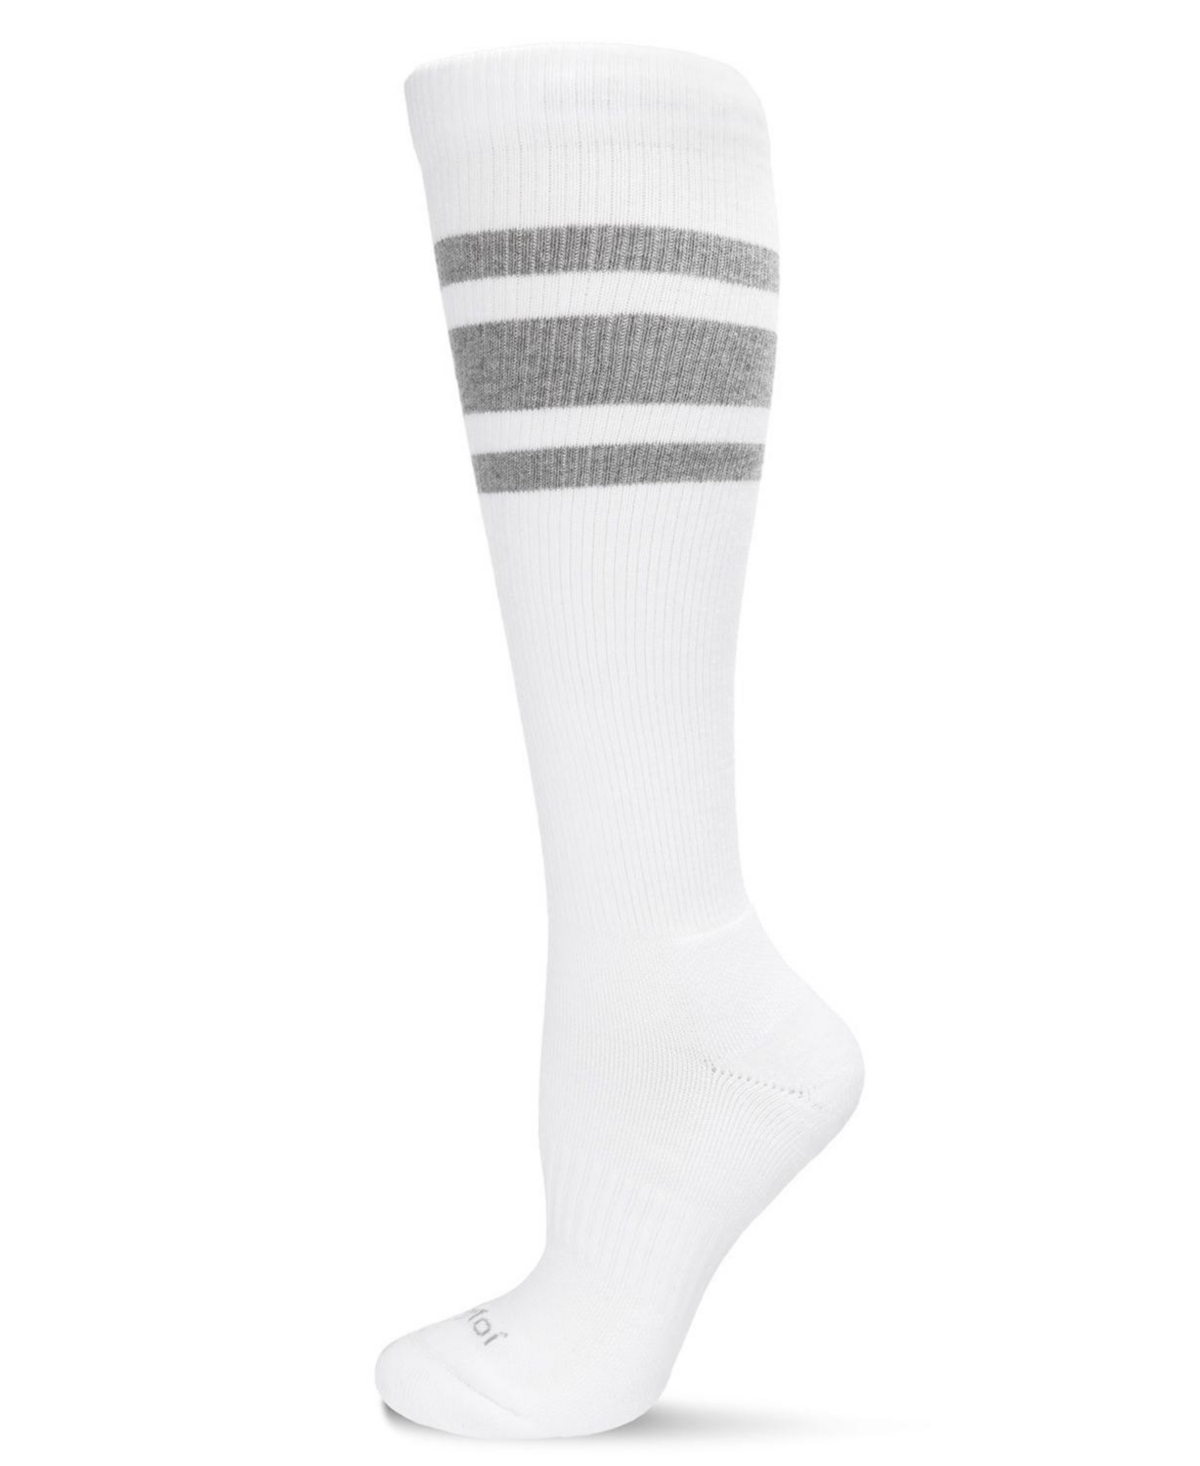 Men's Striped Athletic Cushion Sole Compression Knee Sock - White